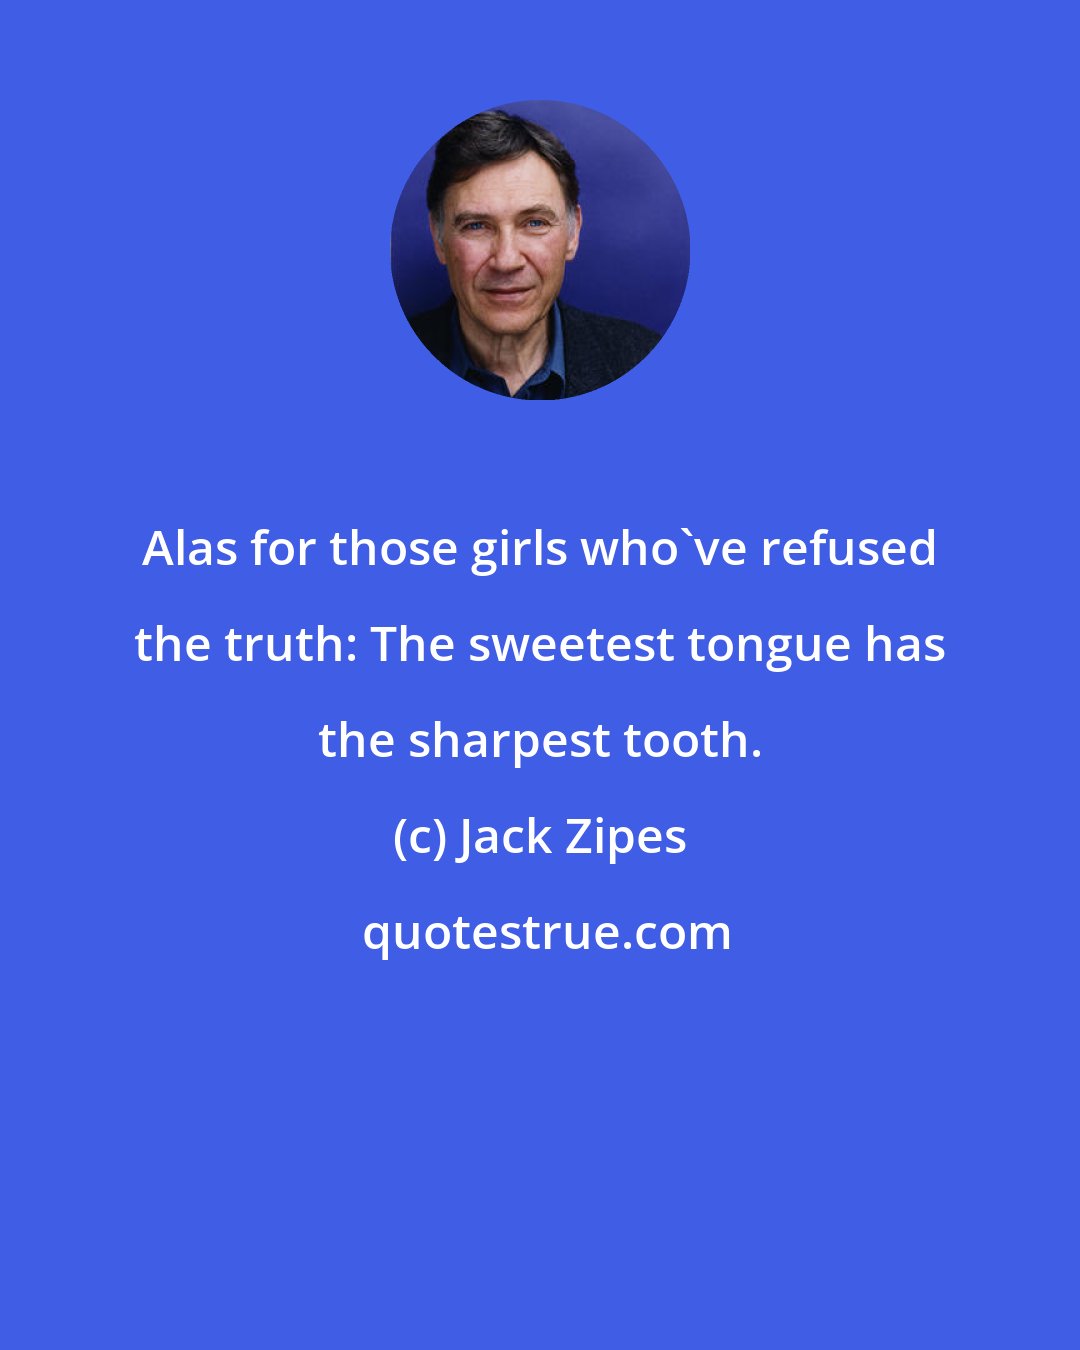 Jack Zipes: Alas for those girls who've refused the truth: The sweetest tongue has the sharpest tooth.